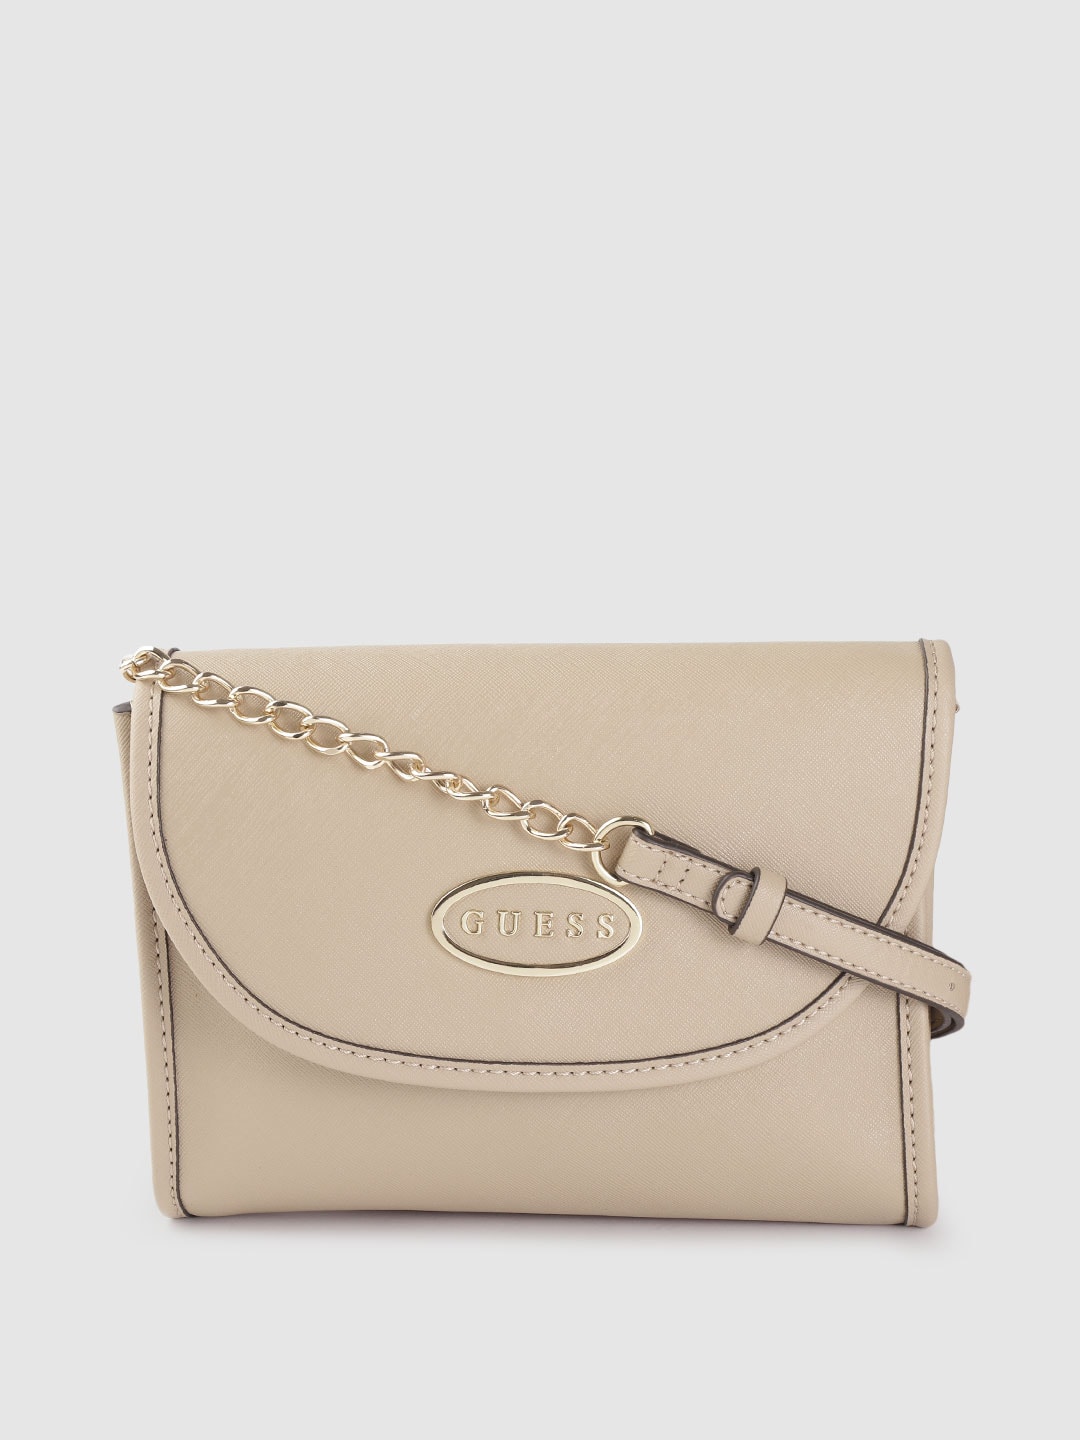 GUESS Women Beige Solid Structured Sling Bag Price in India